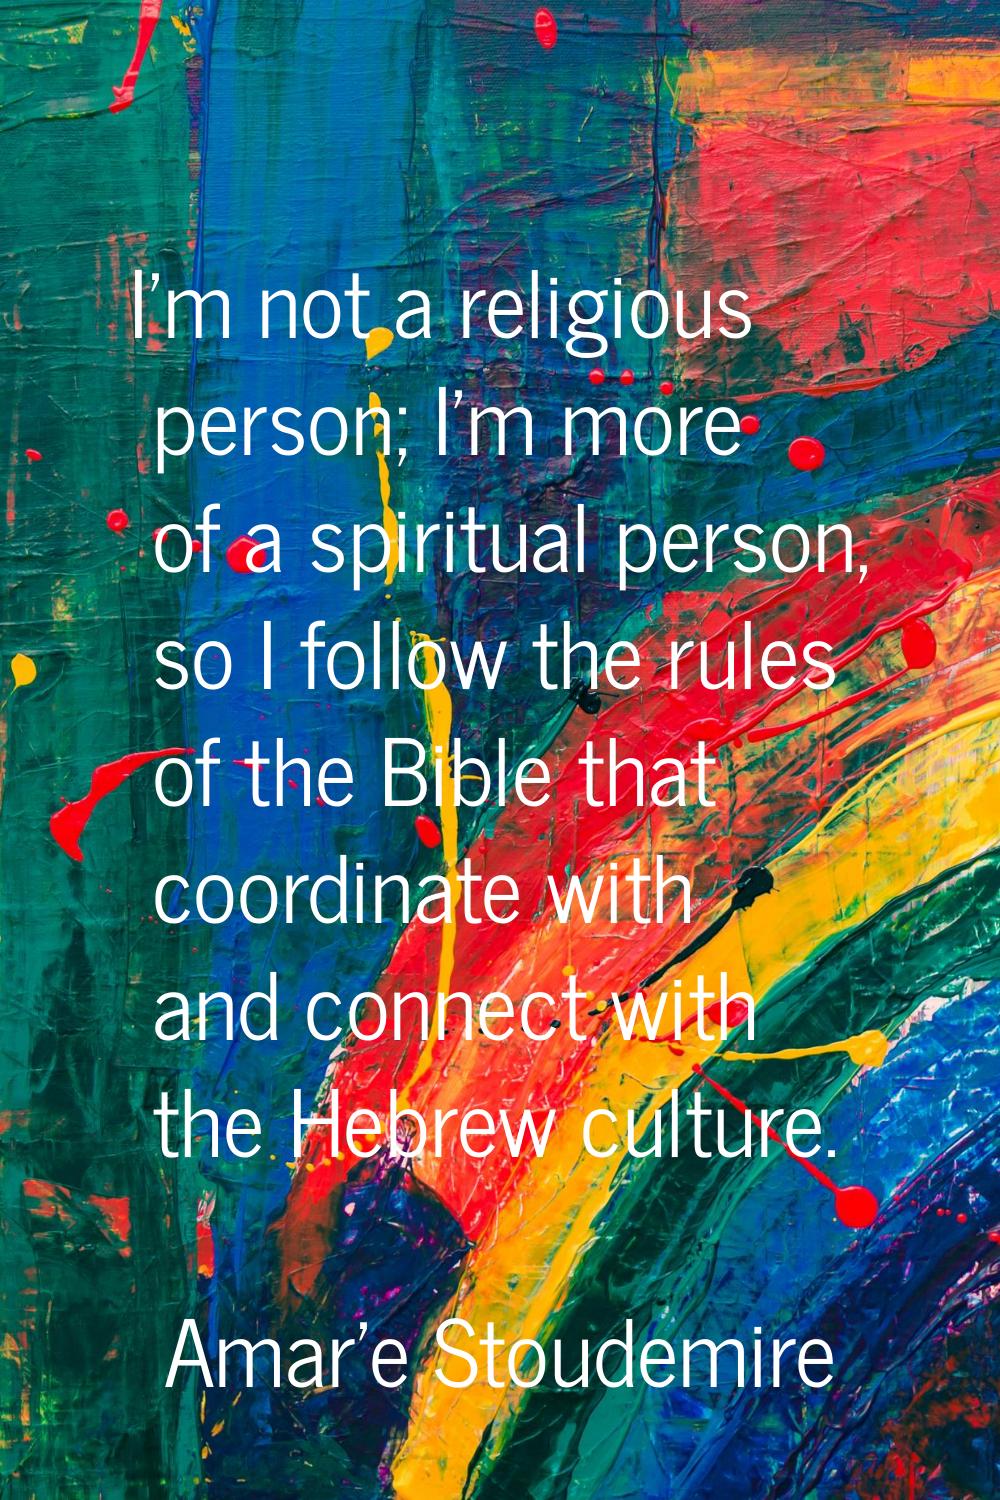 I'm not a religious person; I'm more of a spiritual person, so I follow the rules of the Bible that